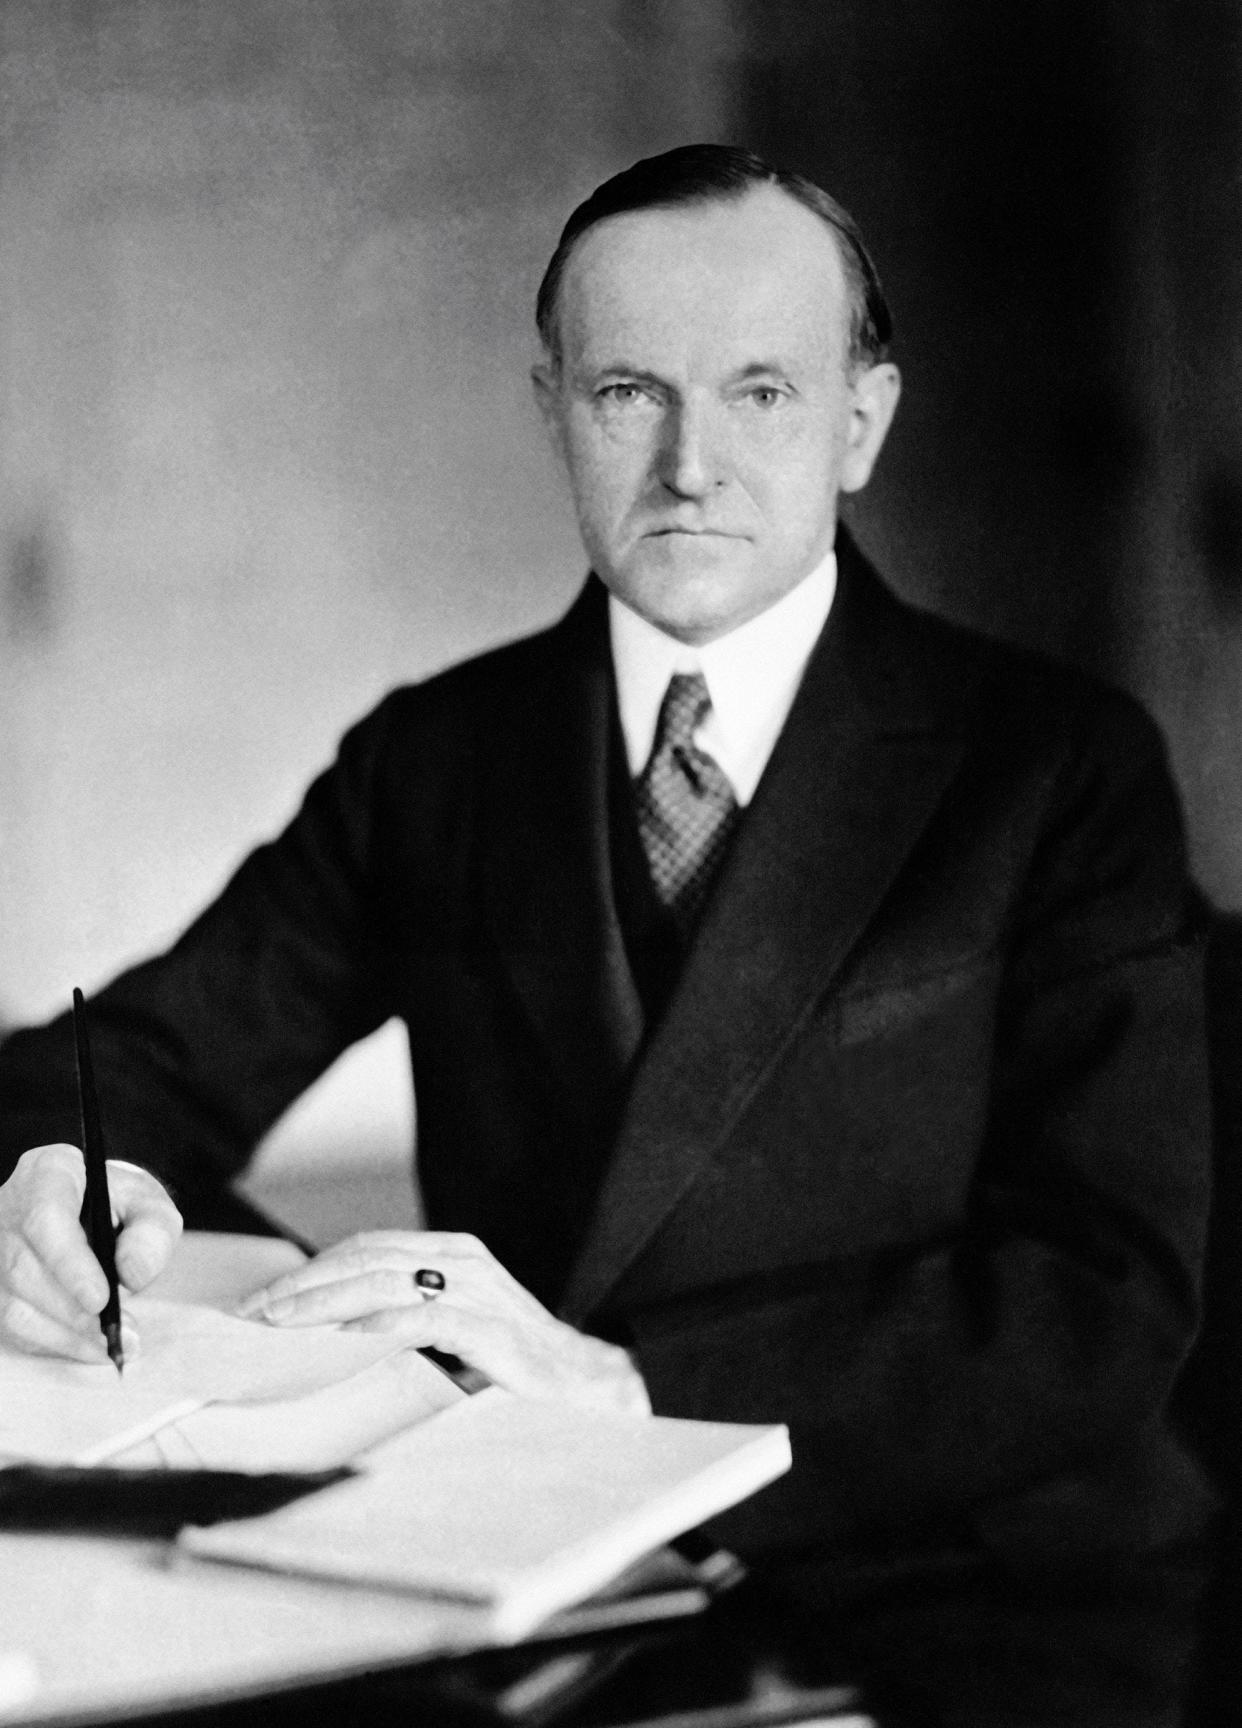 Calvin Coolidge, the 30th president of the United States form 1923 to 1929, poses in an undated photo.